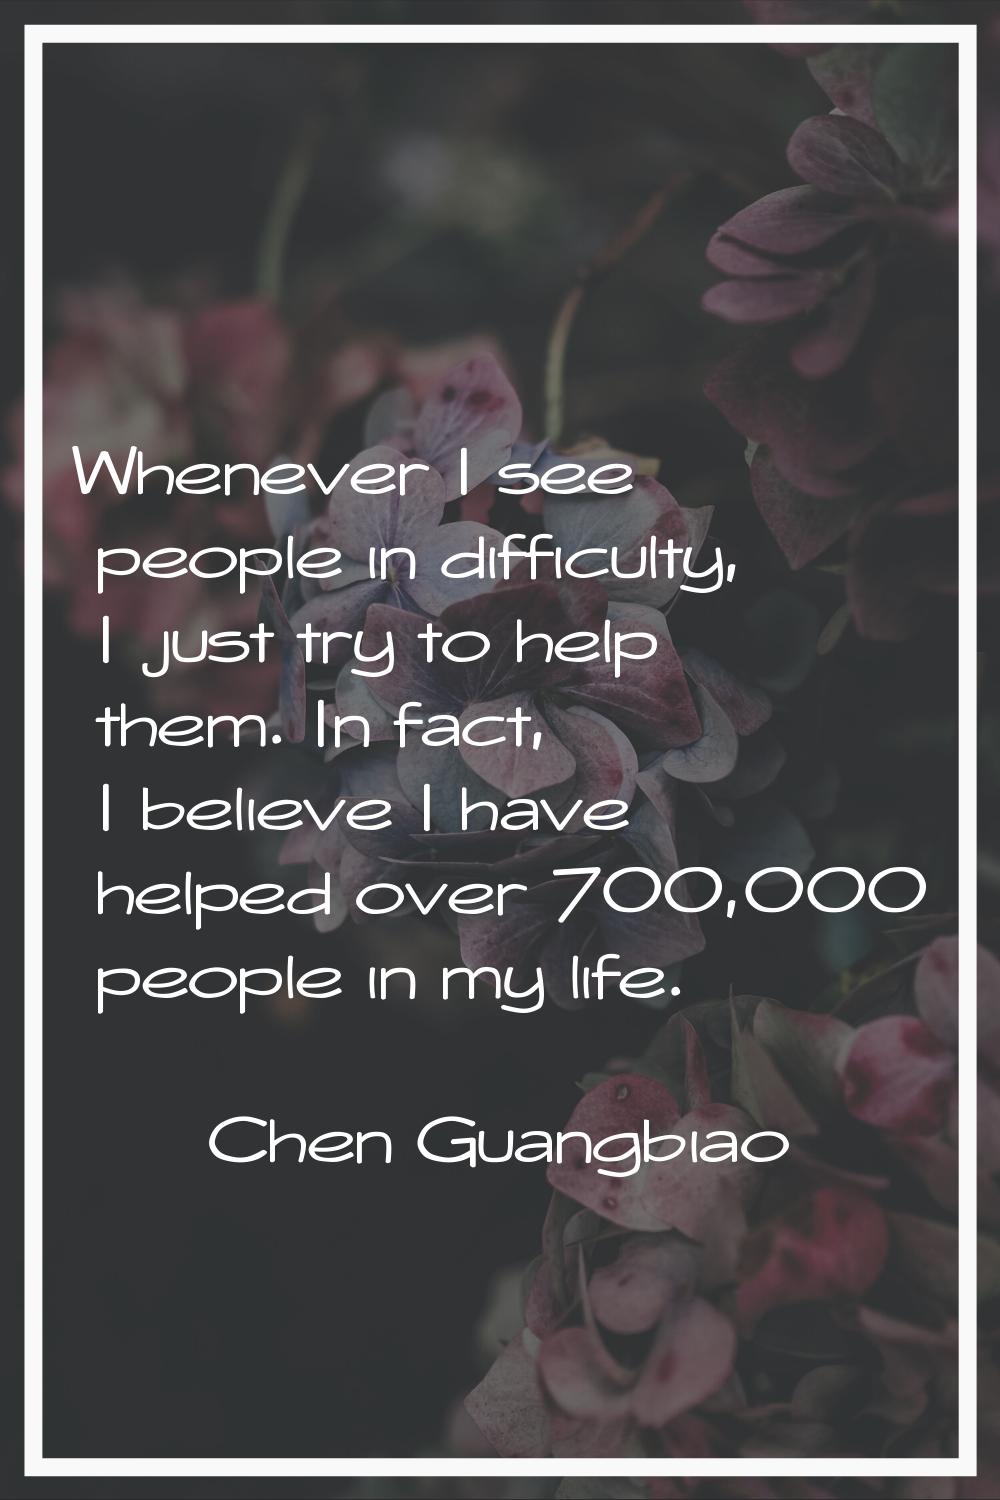 Whenever I see people in difficulty, I just try to help them. In fact, I believe I have helped over